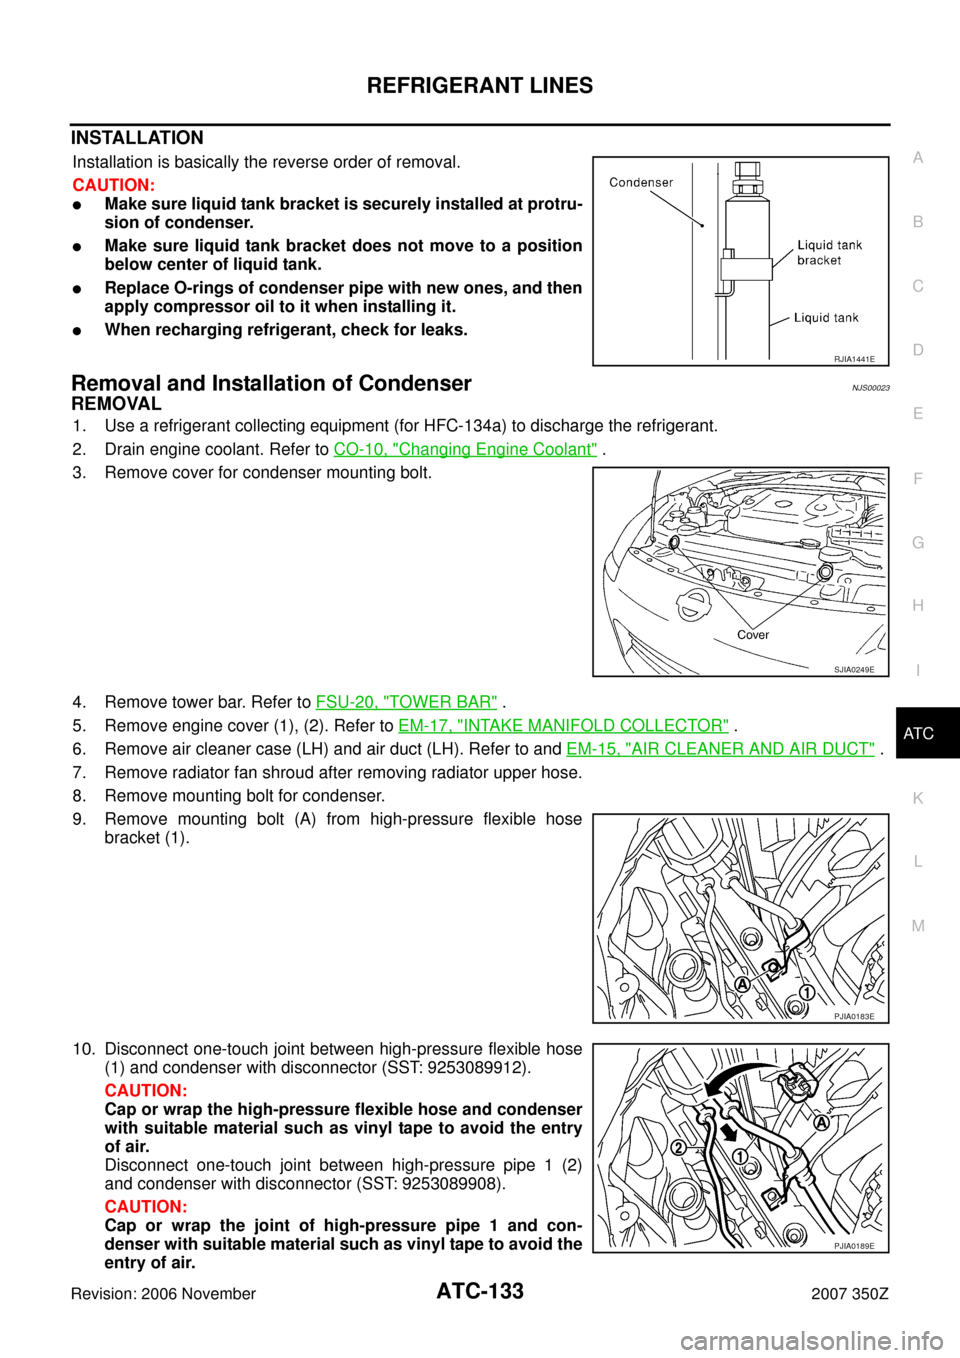 NISSAN 350Z 2007 Z33 Automatic Air Conditioner Workshop Manual REFRIGERANT LINES
ATC-133
C
D
E
F
G
H
I
K
L
MA
B
AT C
Revision: 2006 November2007 350Z
INSTALLATION
Installation is basically the reverse order of removal.
CAUTION:
Make sure liquid tank bracket is s